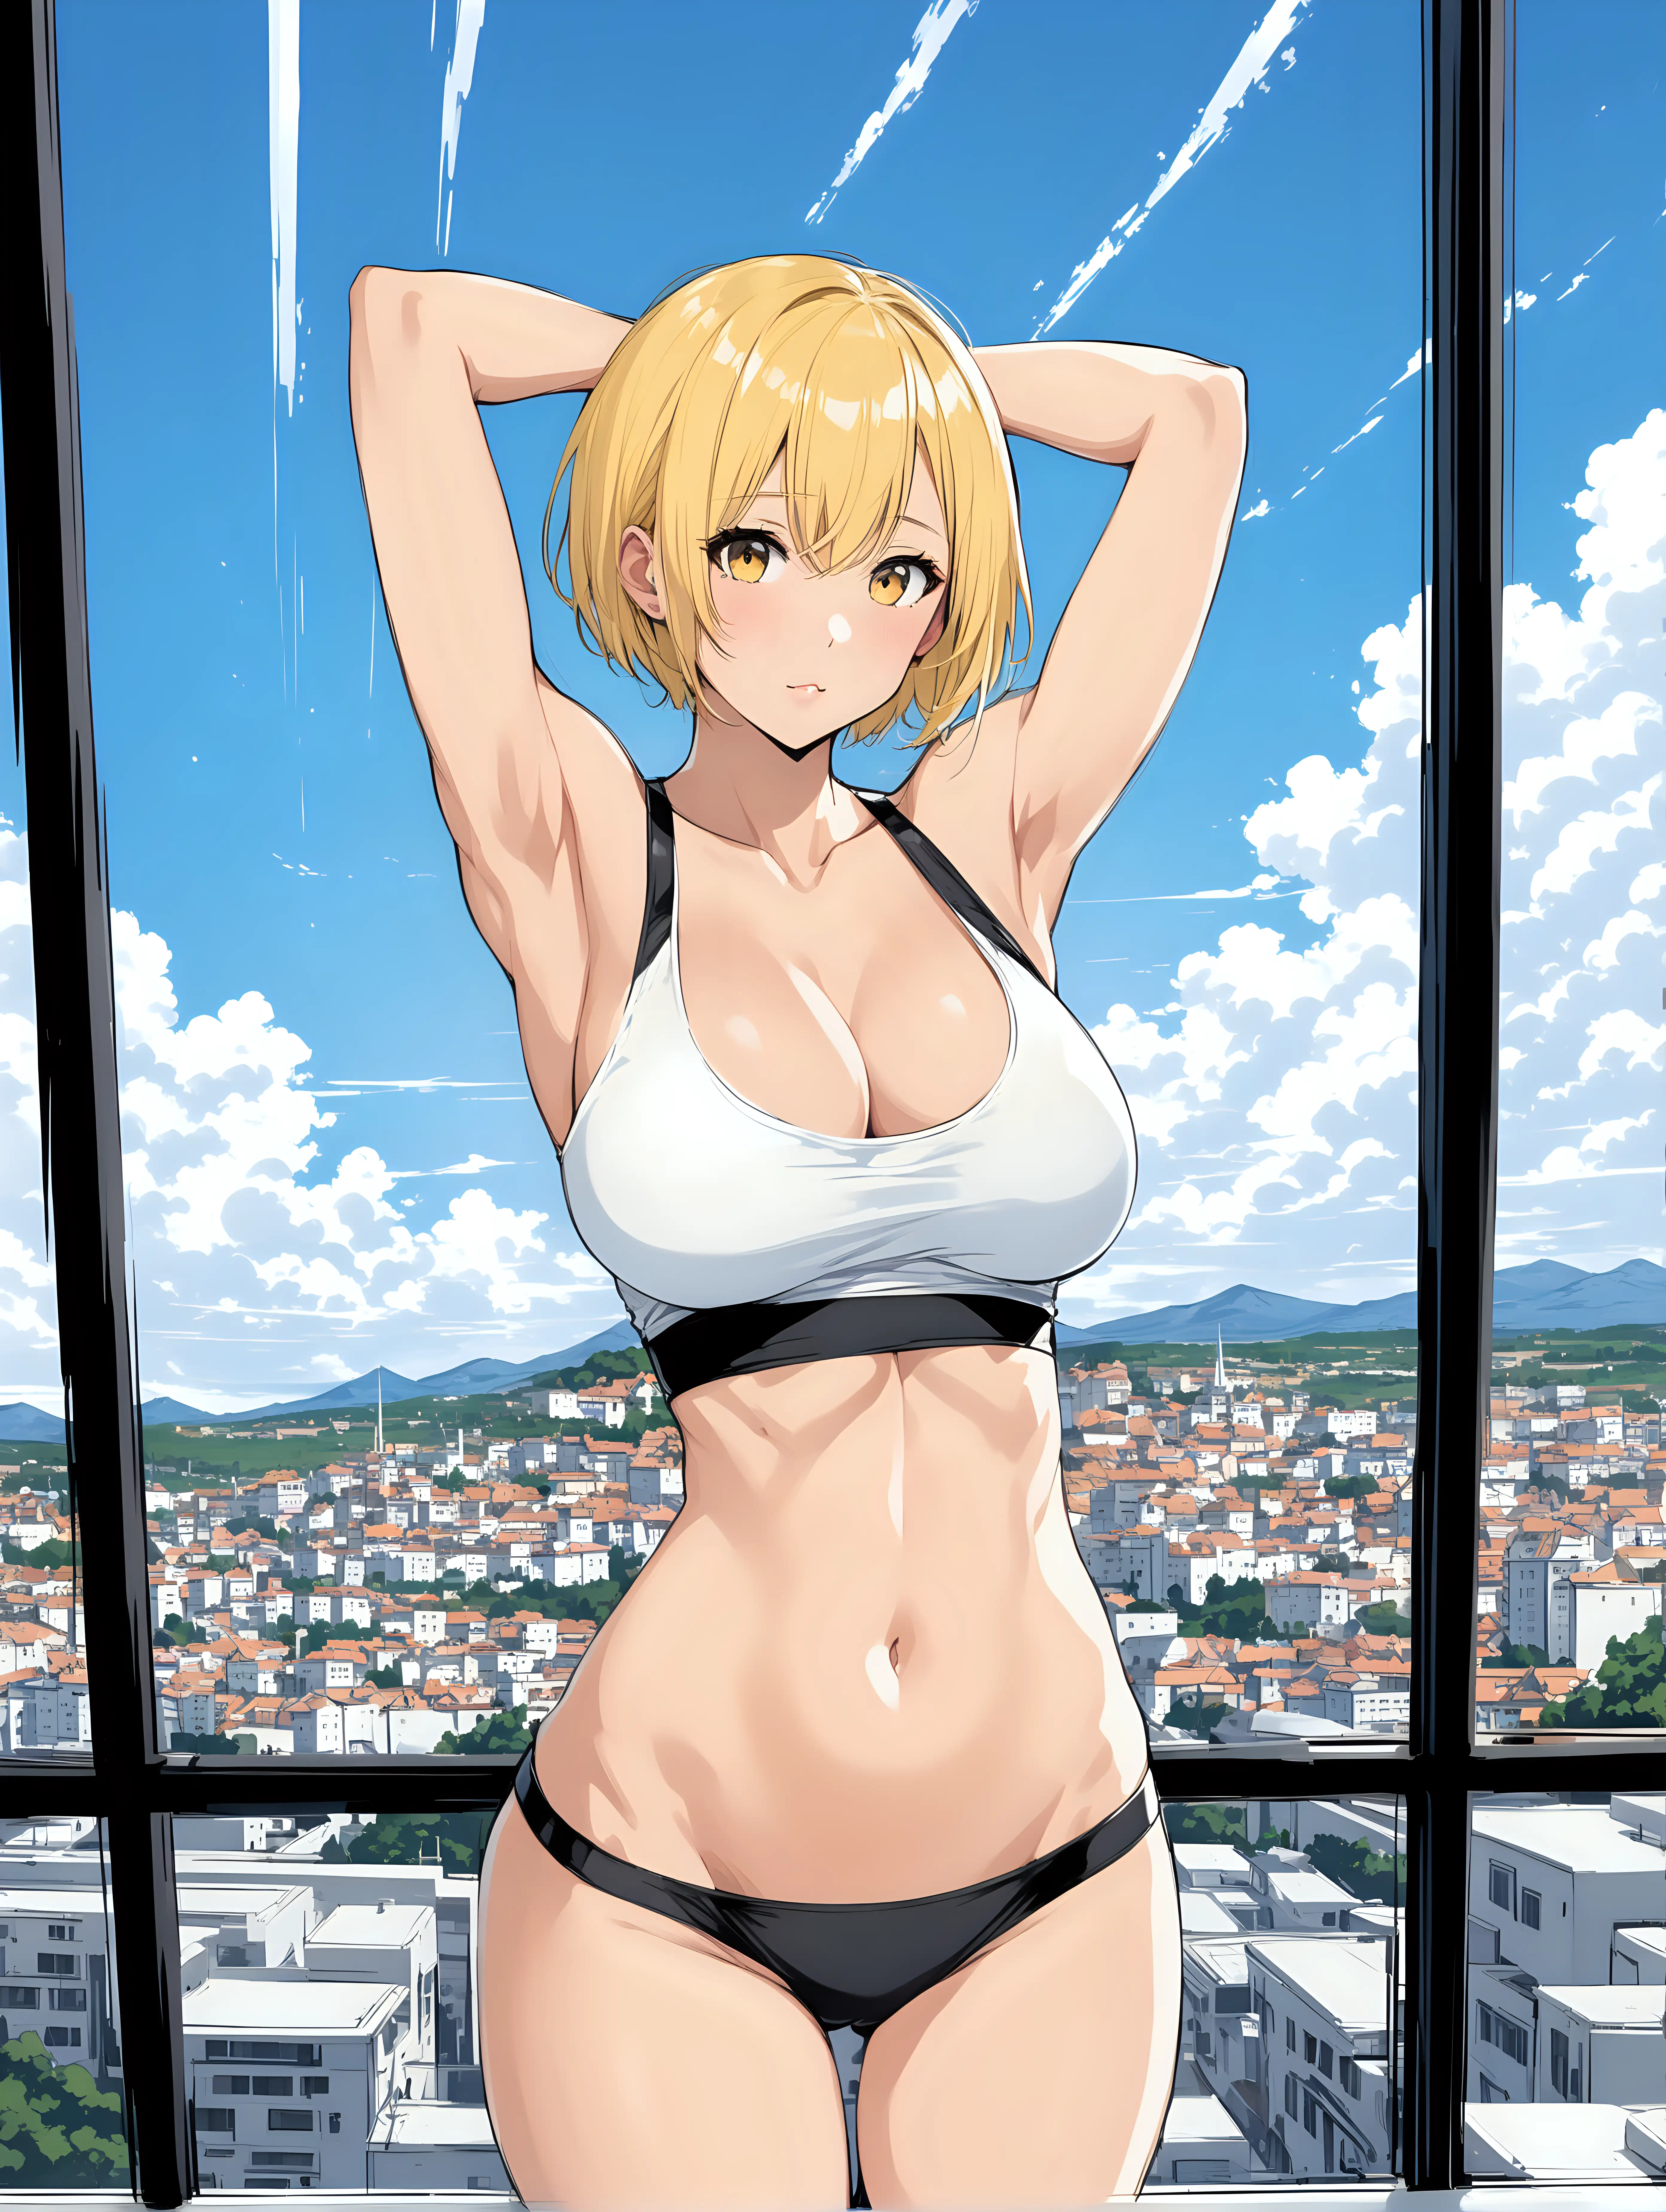 sexy fit 24 year old hero girl, short chin length yellow hair, lifting up white tank top over head exposing breasts, wearing short, black panties, sexy toned body, blue sky and futuristic town in background through window, yellow black white 3 color minimal design